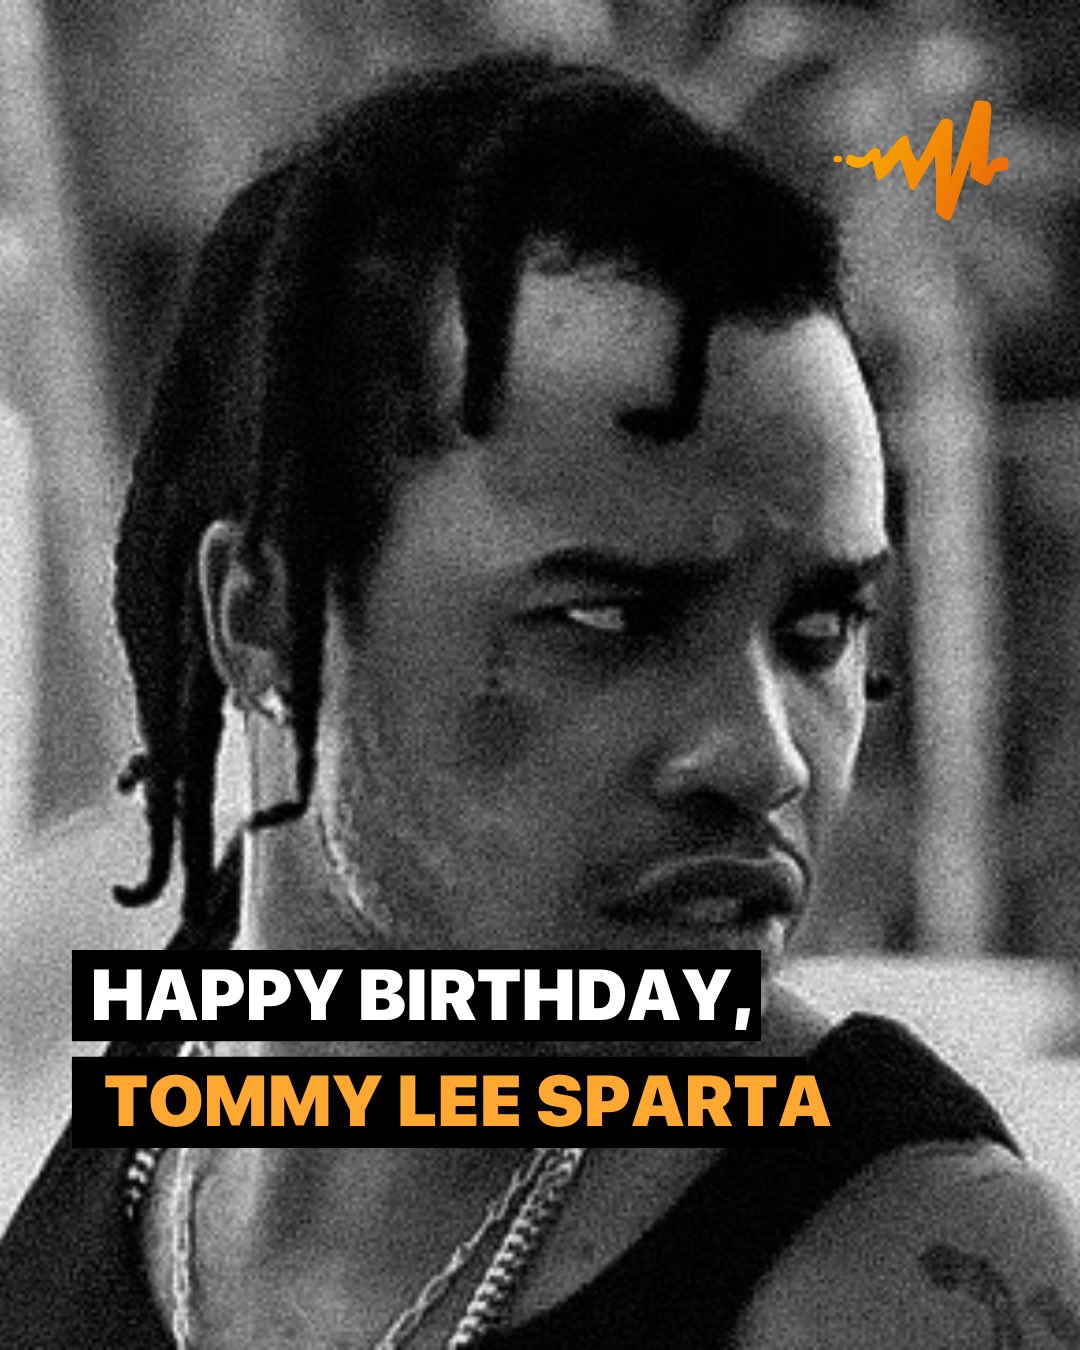 Happy Birthday Tommy Lee Sparta!
What s your favorite Tommy Lee Track?    